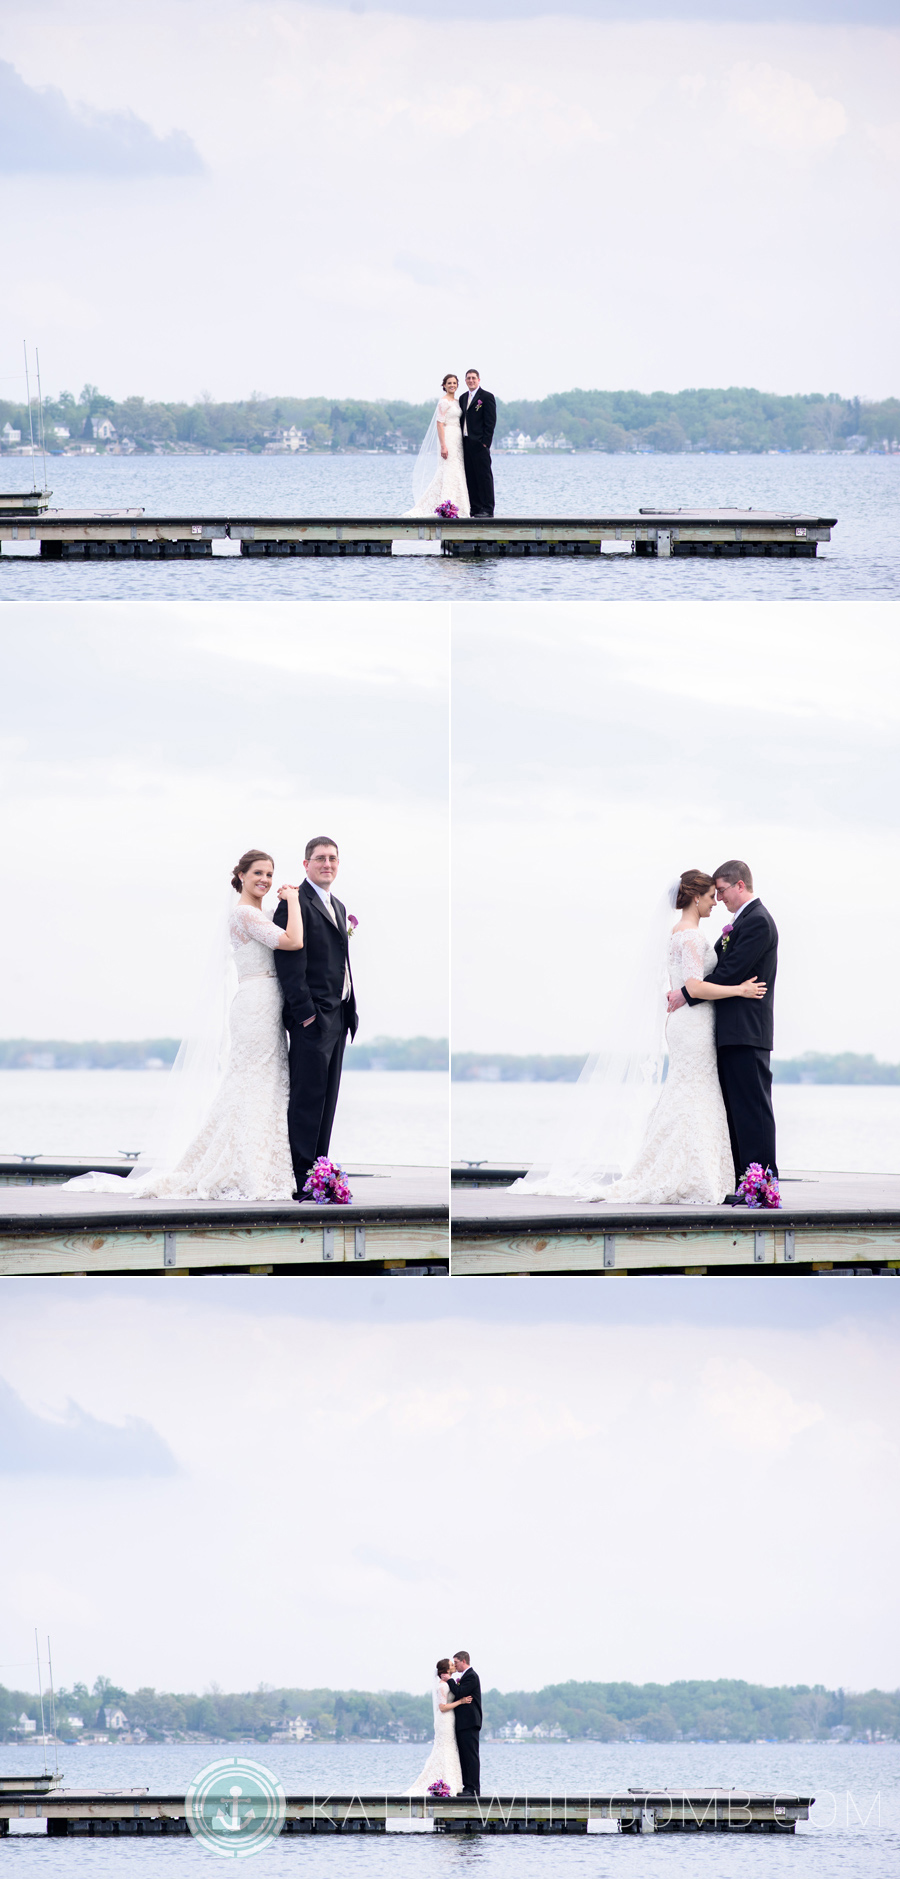 Bride & Groom's Intimate portraits by the lake on Culver Academy campus